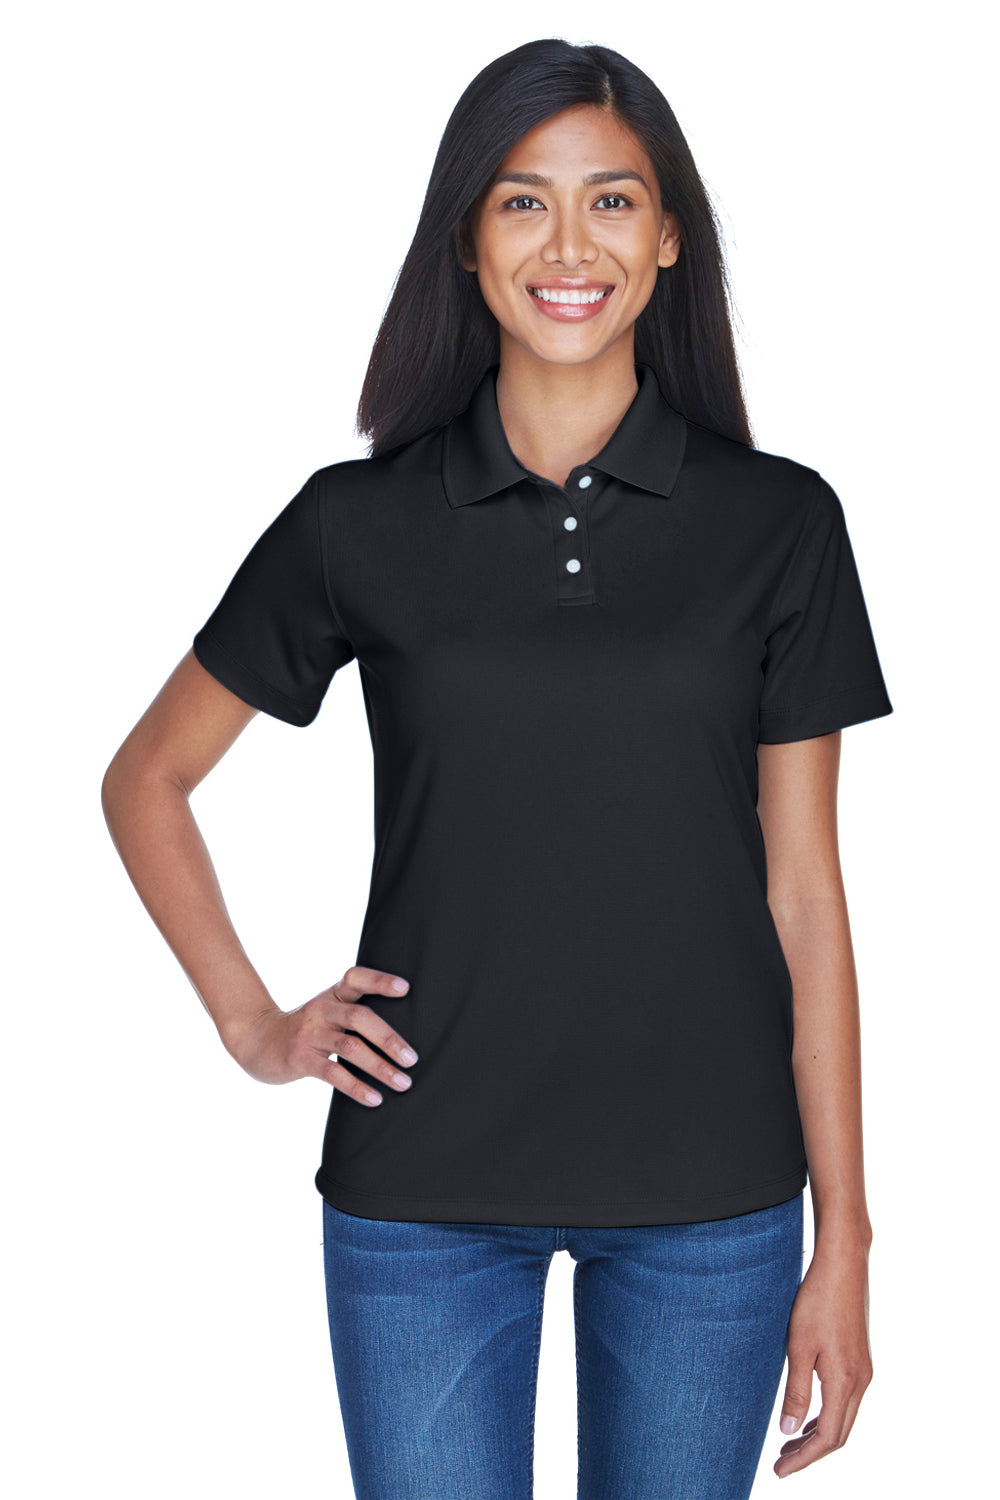 UltraClub 8445L Womens Cool & Dry Performance Moisture Wicking Short Sleeve Polo Shirt Black Front